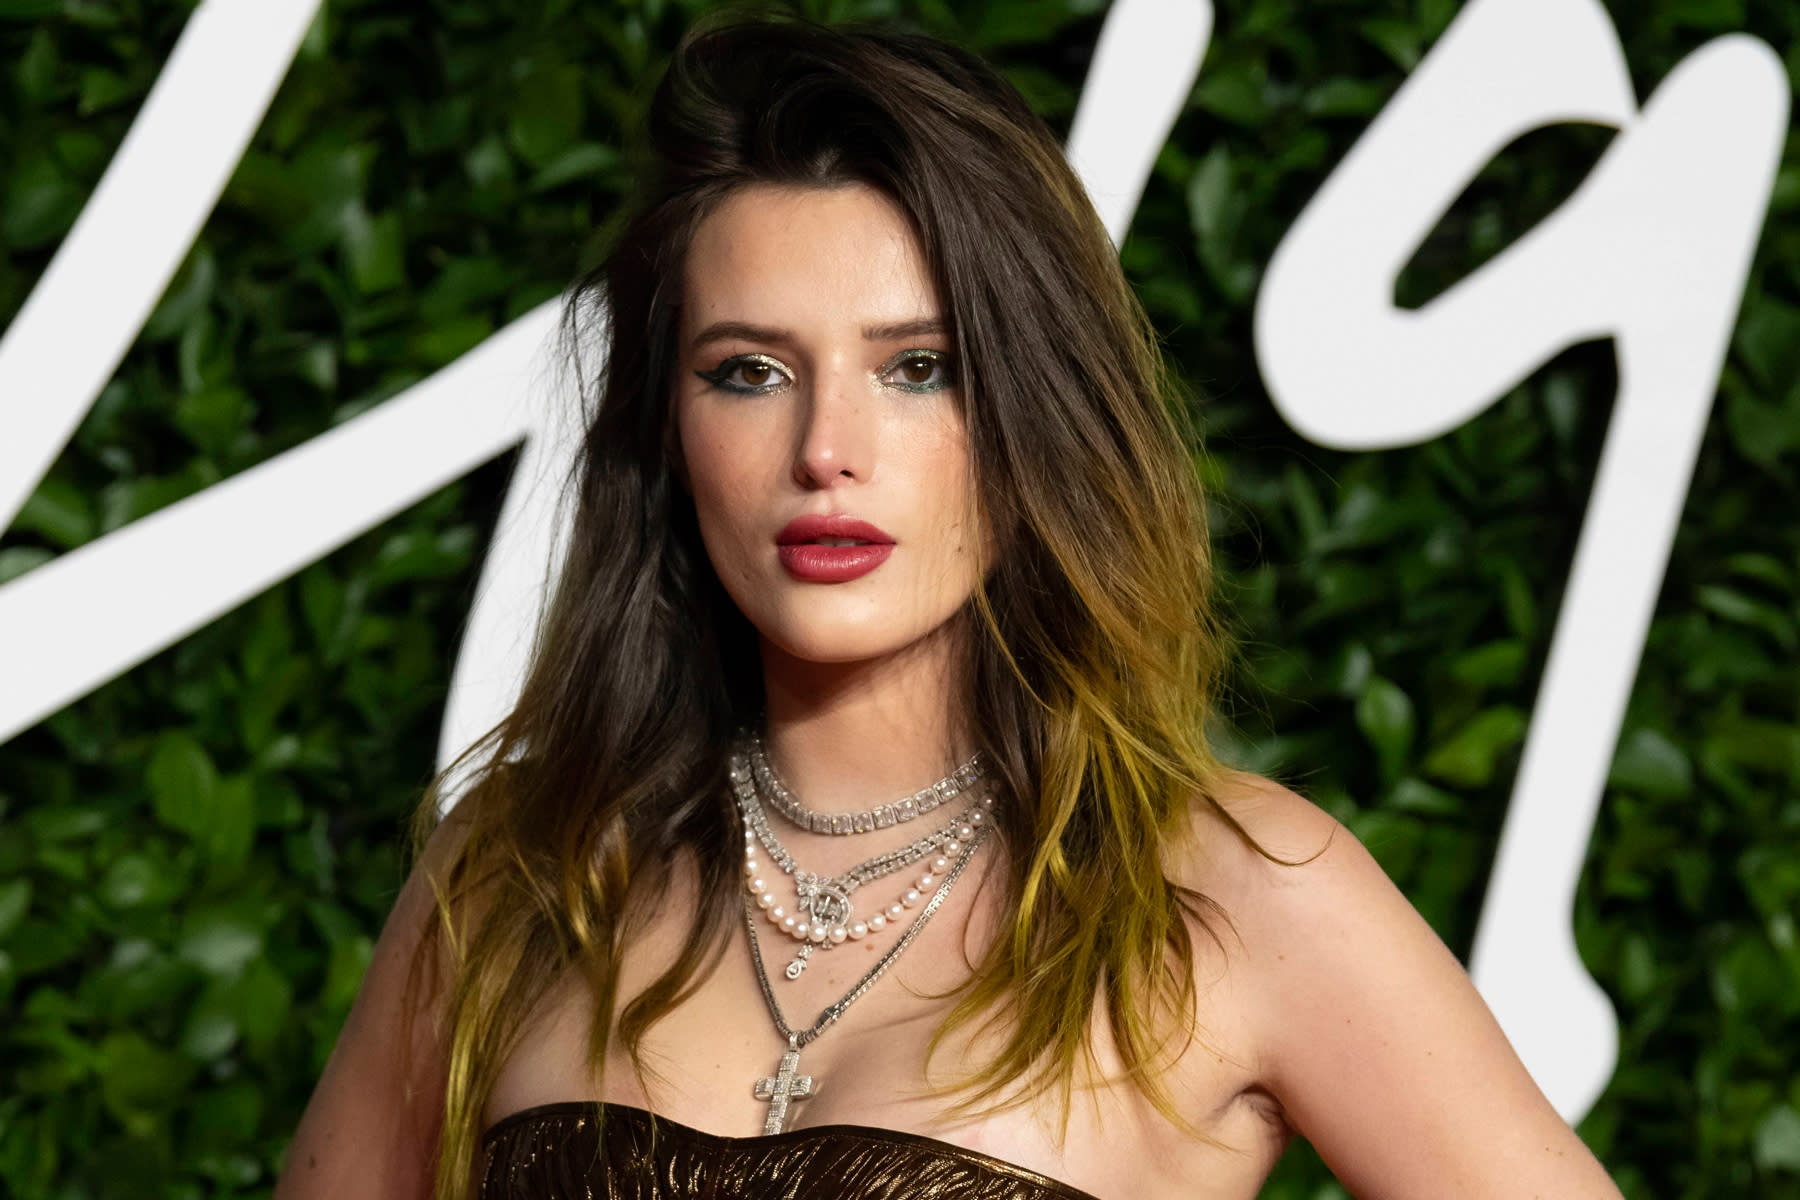 Bella Thorne Apologizes To Sex Workers After Onlyfans Uproar